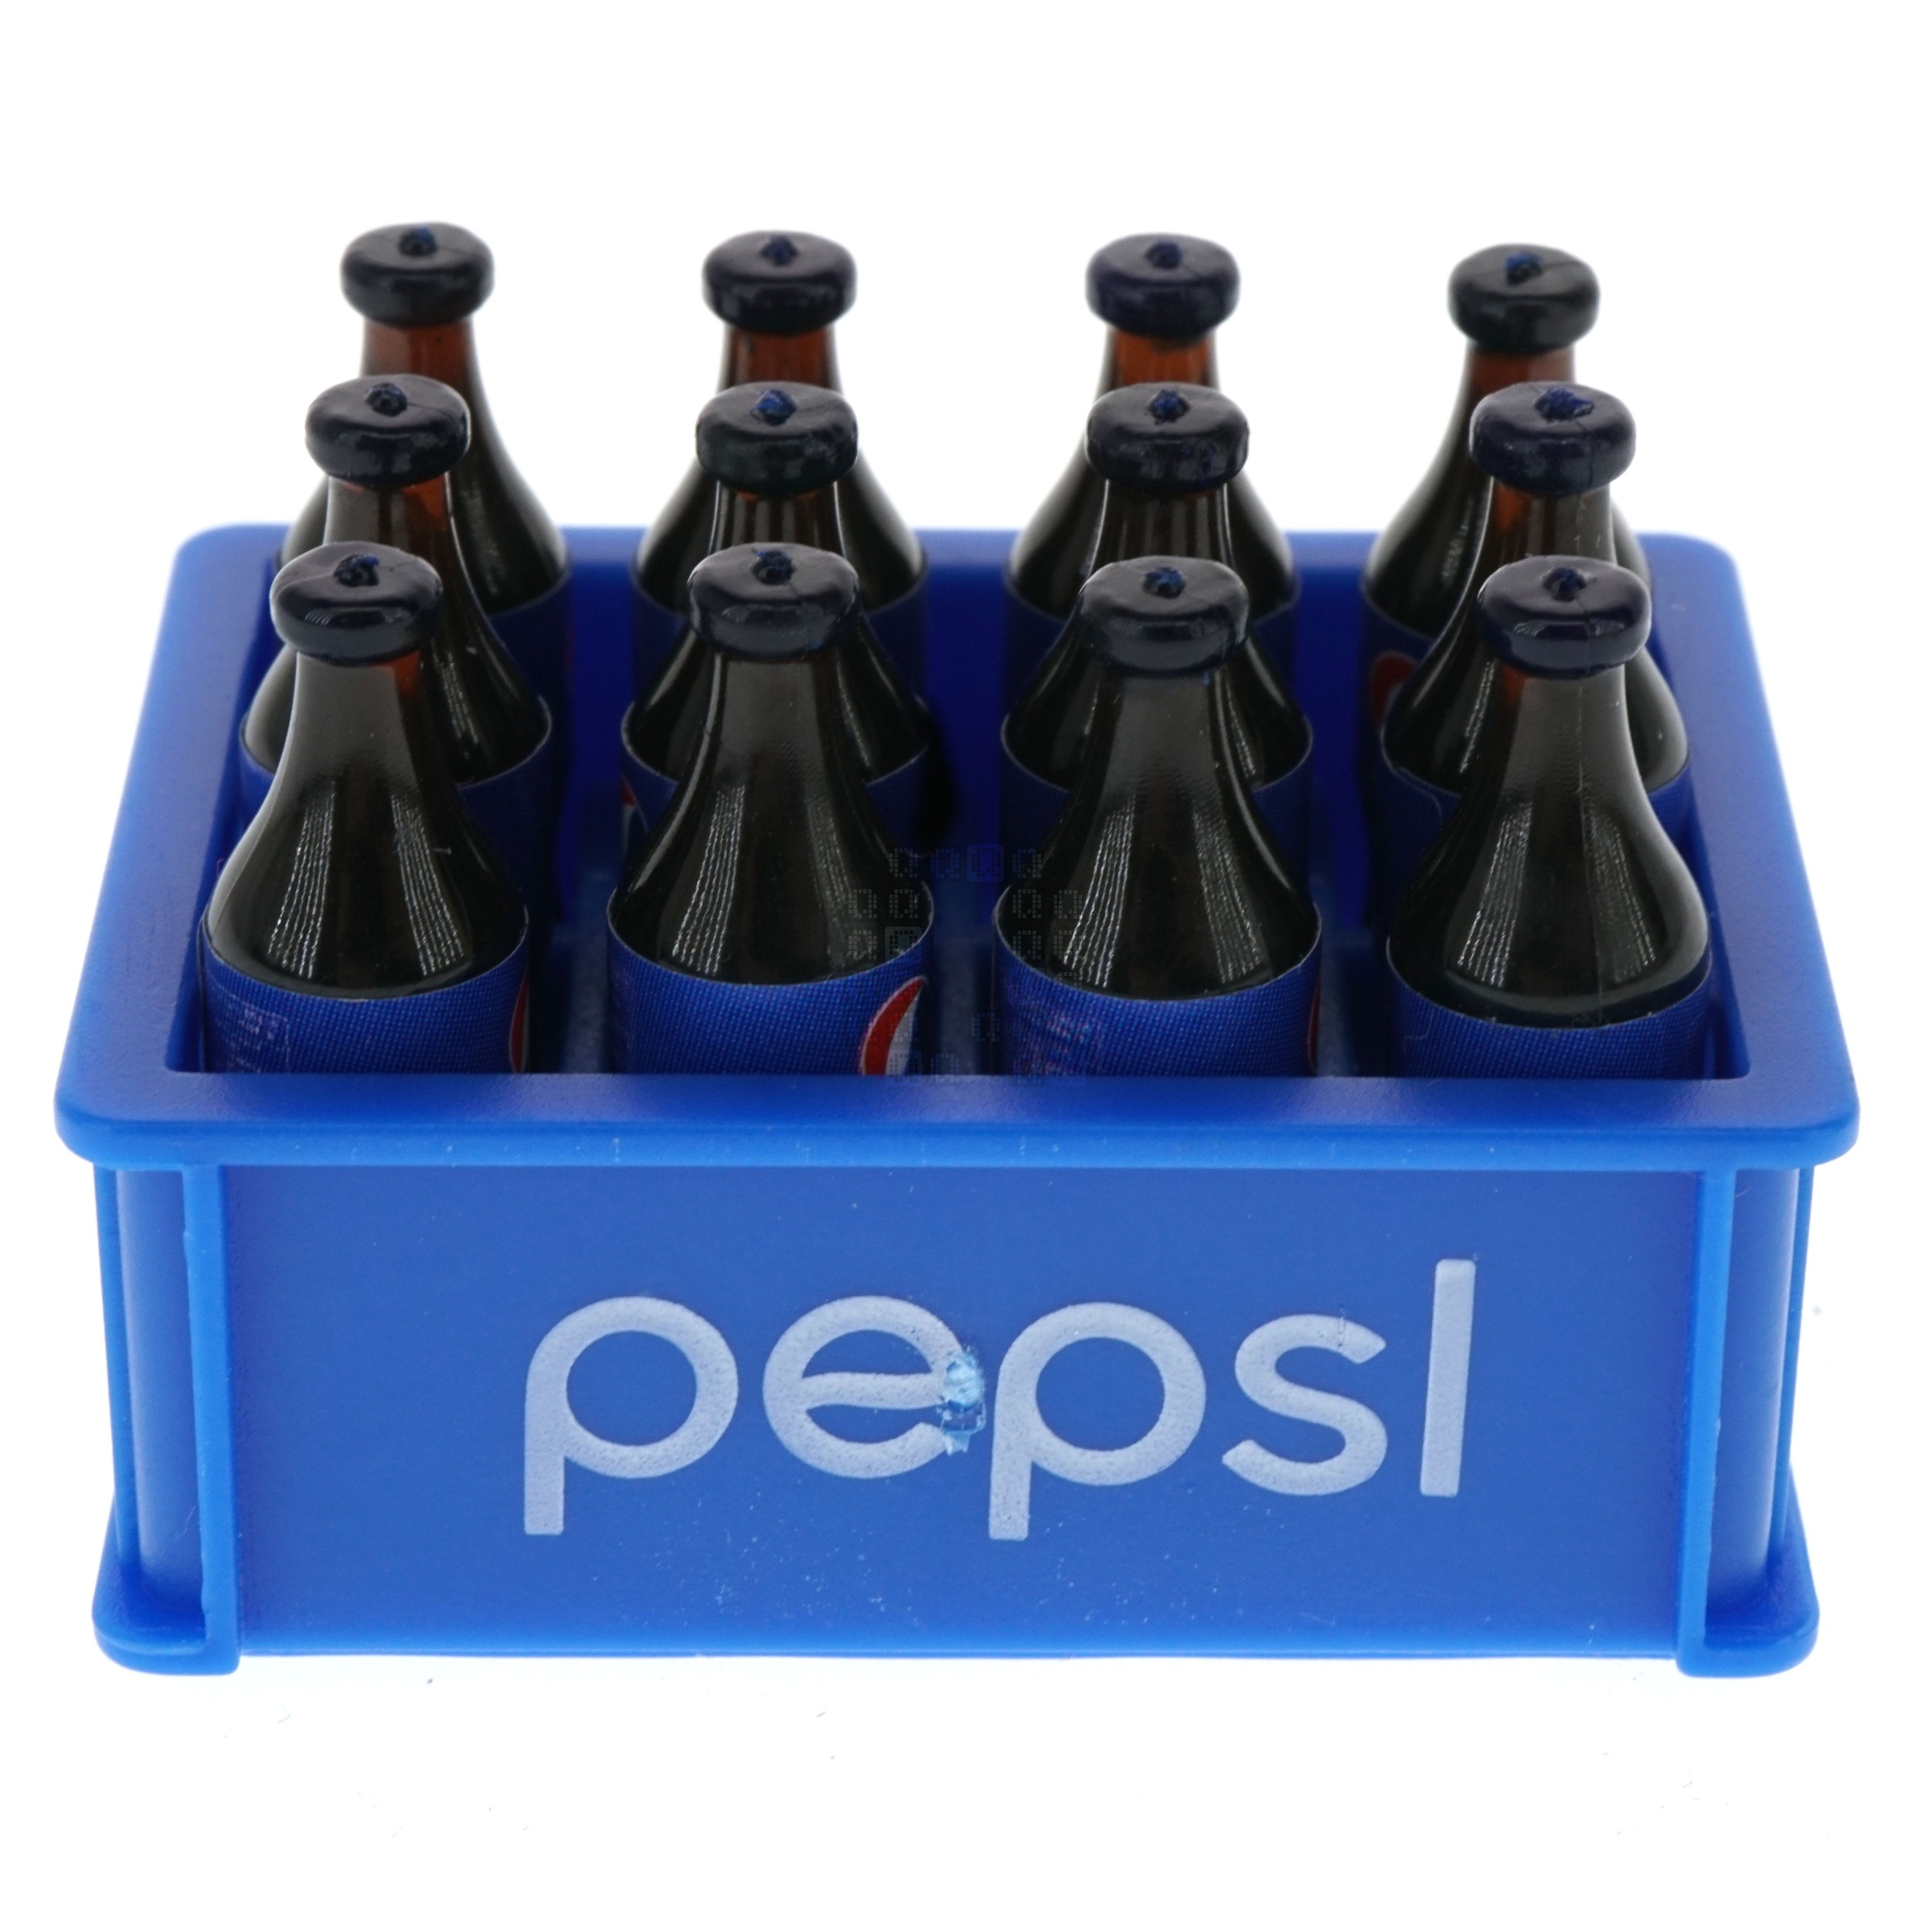 1:12 Scale, 12 Miniature Pepsl Resin 'Glass' Bottles in Plastic Carrying Case